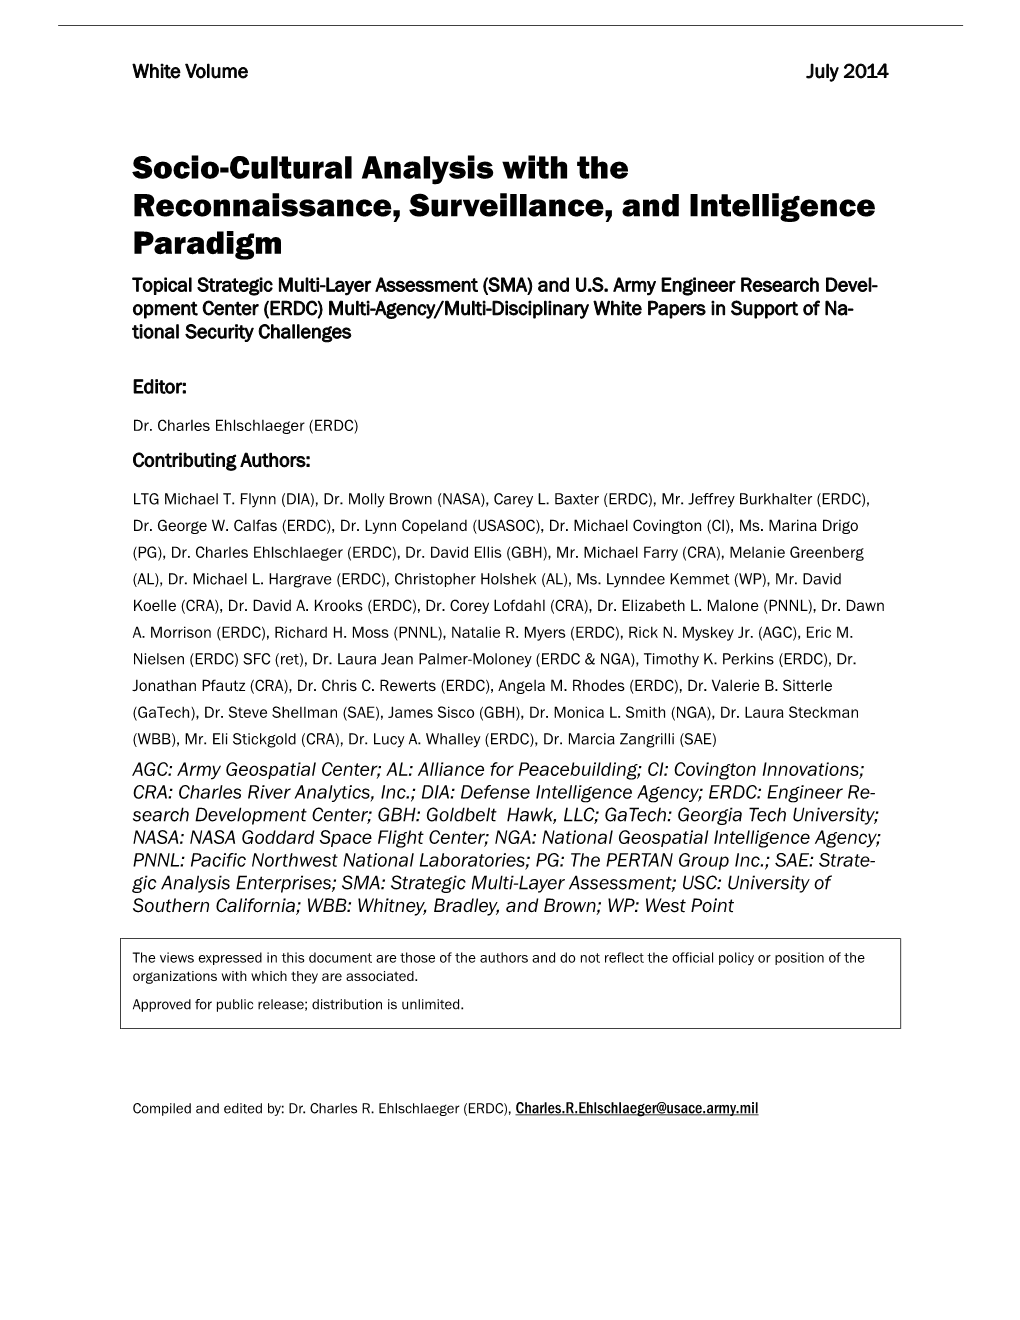 Socio-Cultural Analysis with the Reconnaissance, Surveillance, and Intelligence Paradigm Topical Strategic Multi-Layer Assessment (SMA) and U.S